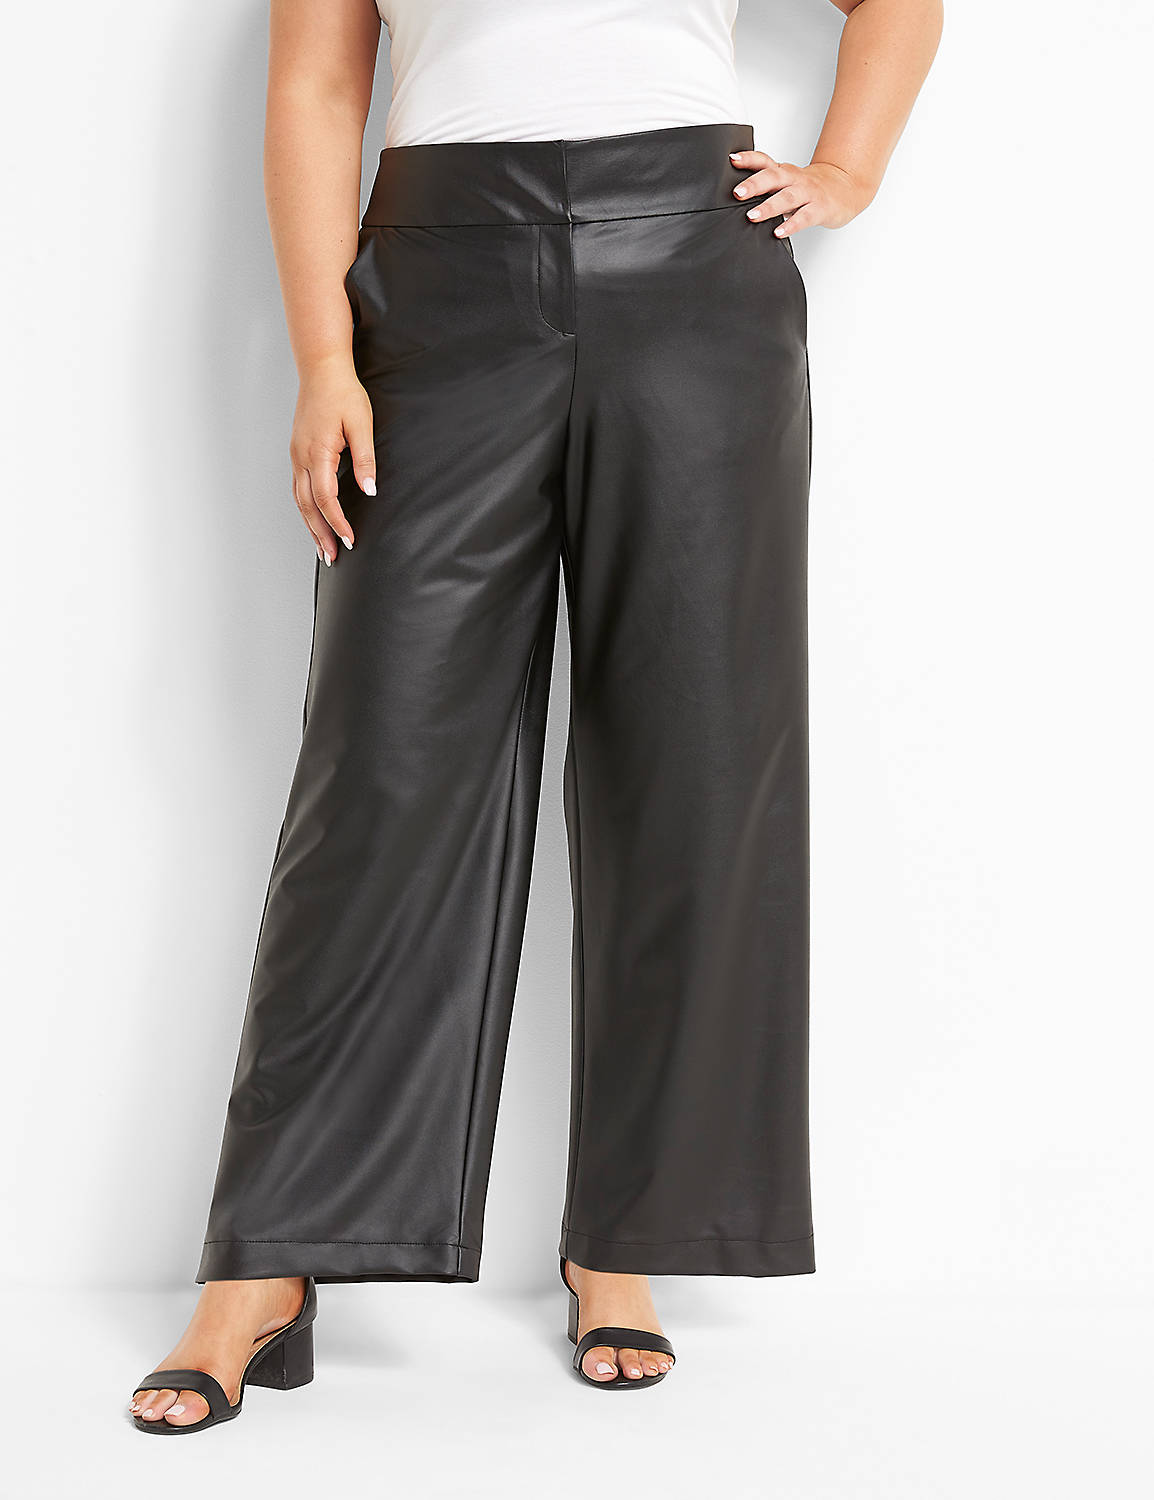 Faux Leather Wideleg 1122431 Product Image 1